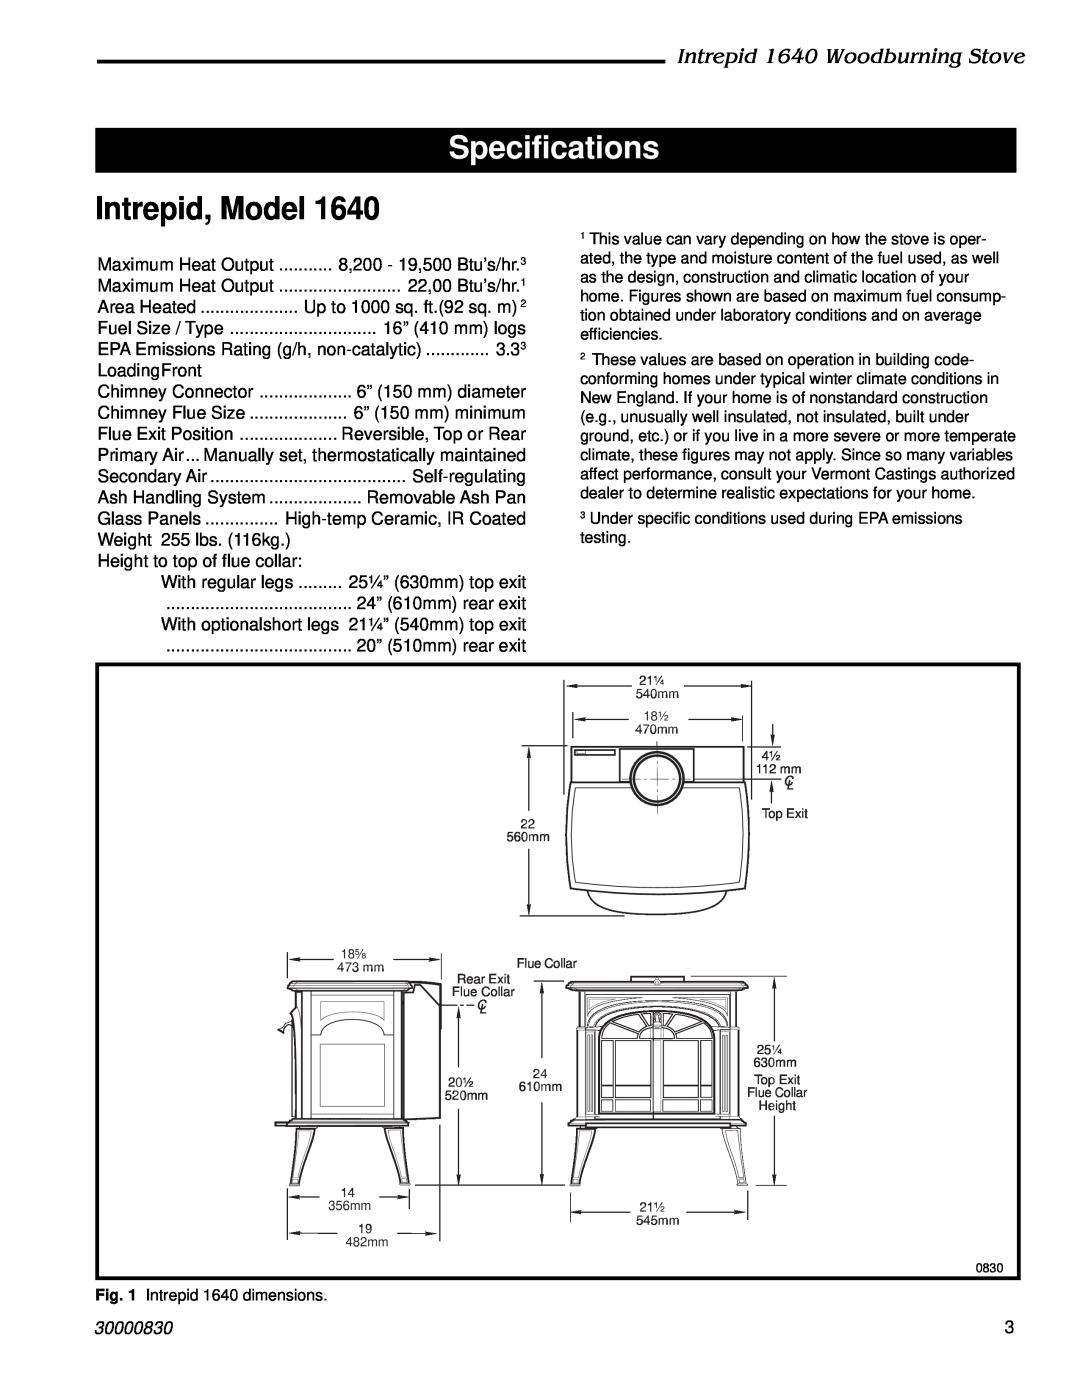 Vermont Casting installation instructions Specifications, Intrepid, Model, Intrepid 1640 Woodburning Stove 